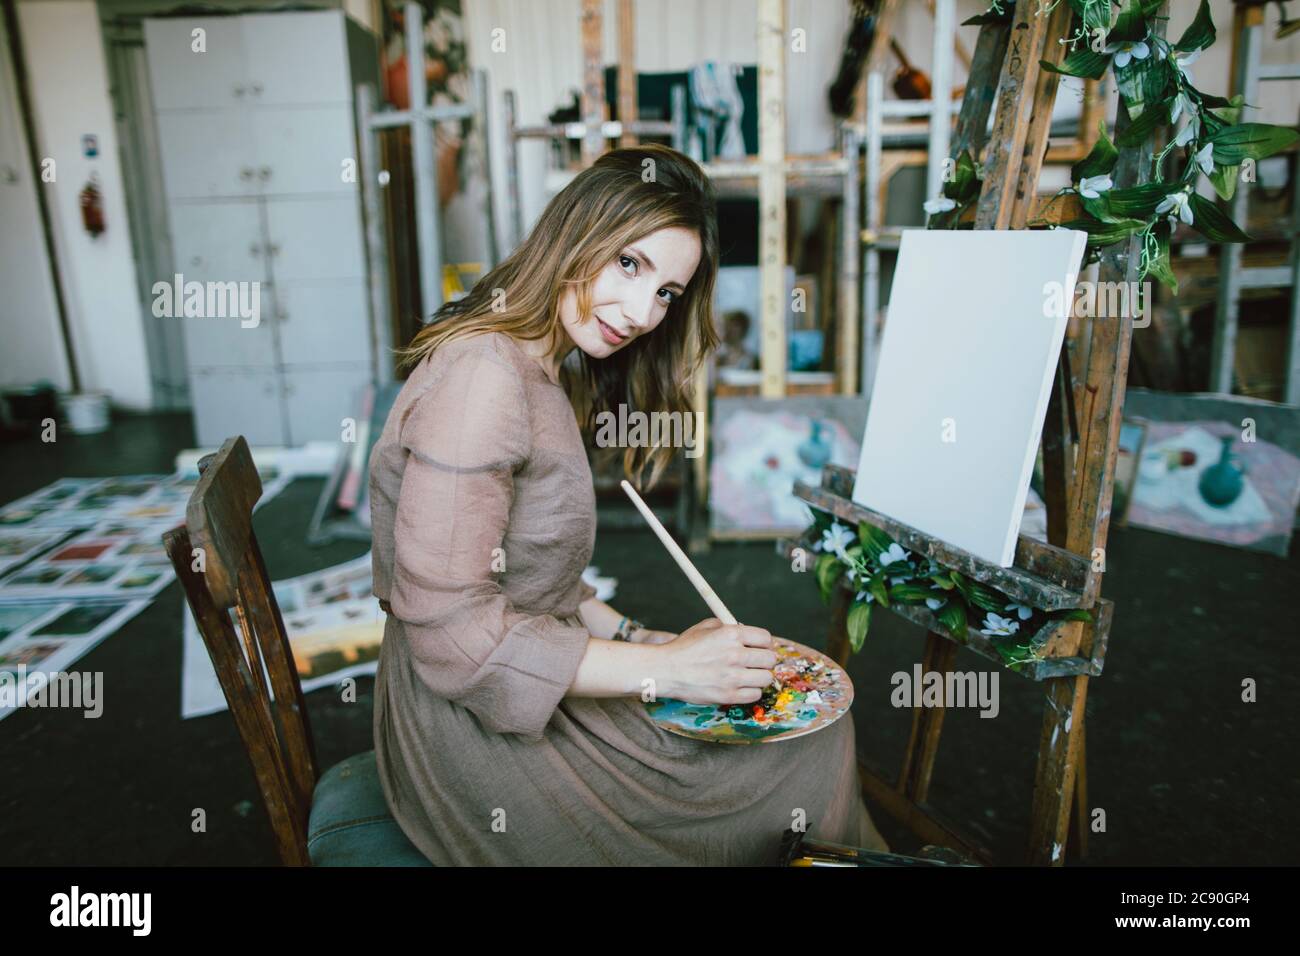 Woman painting on canvas in art studio Banque D'Images